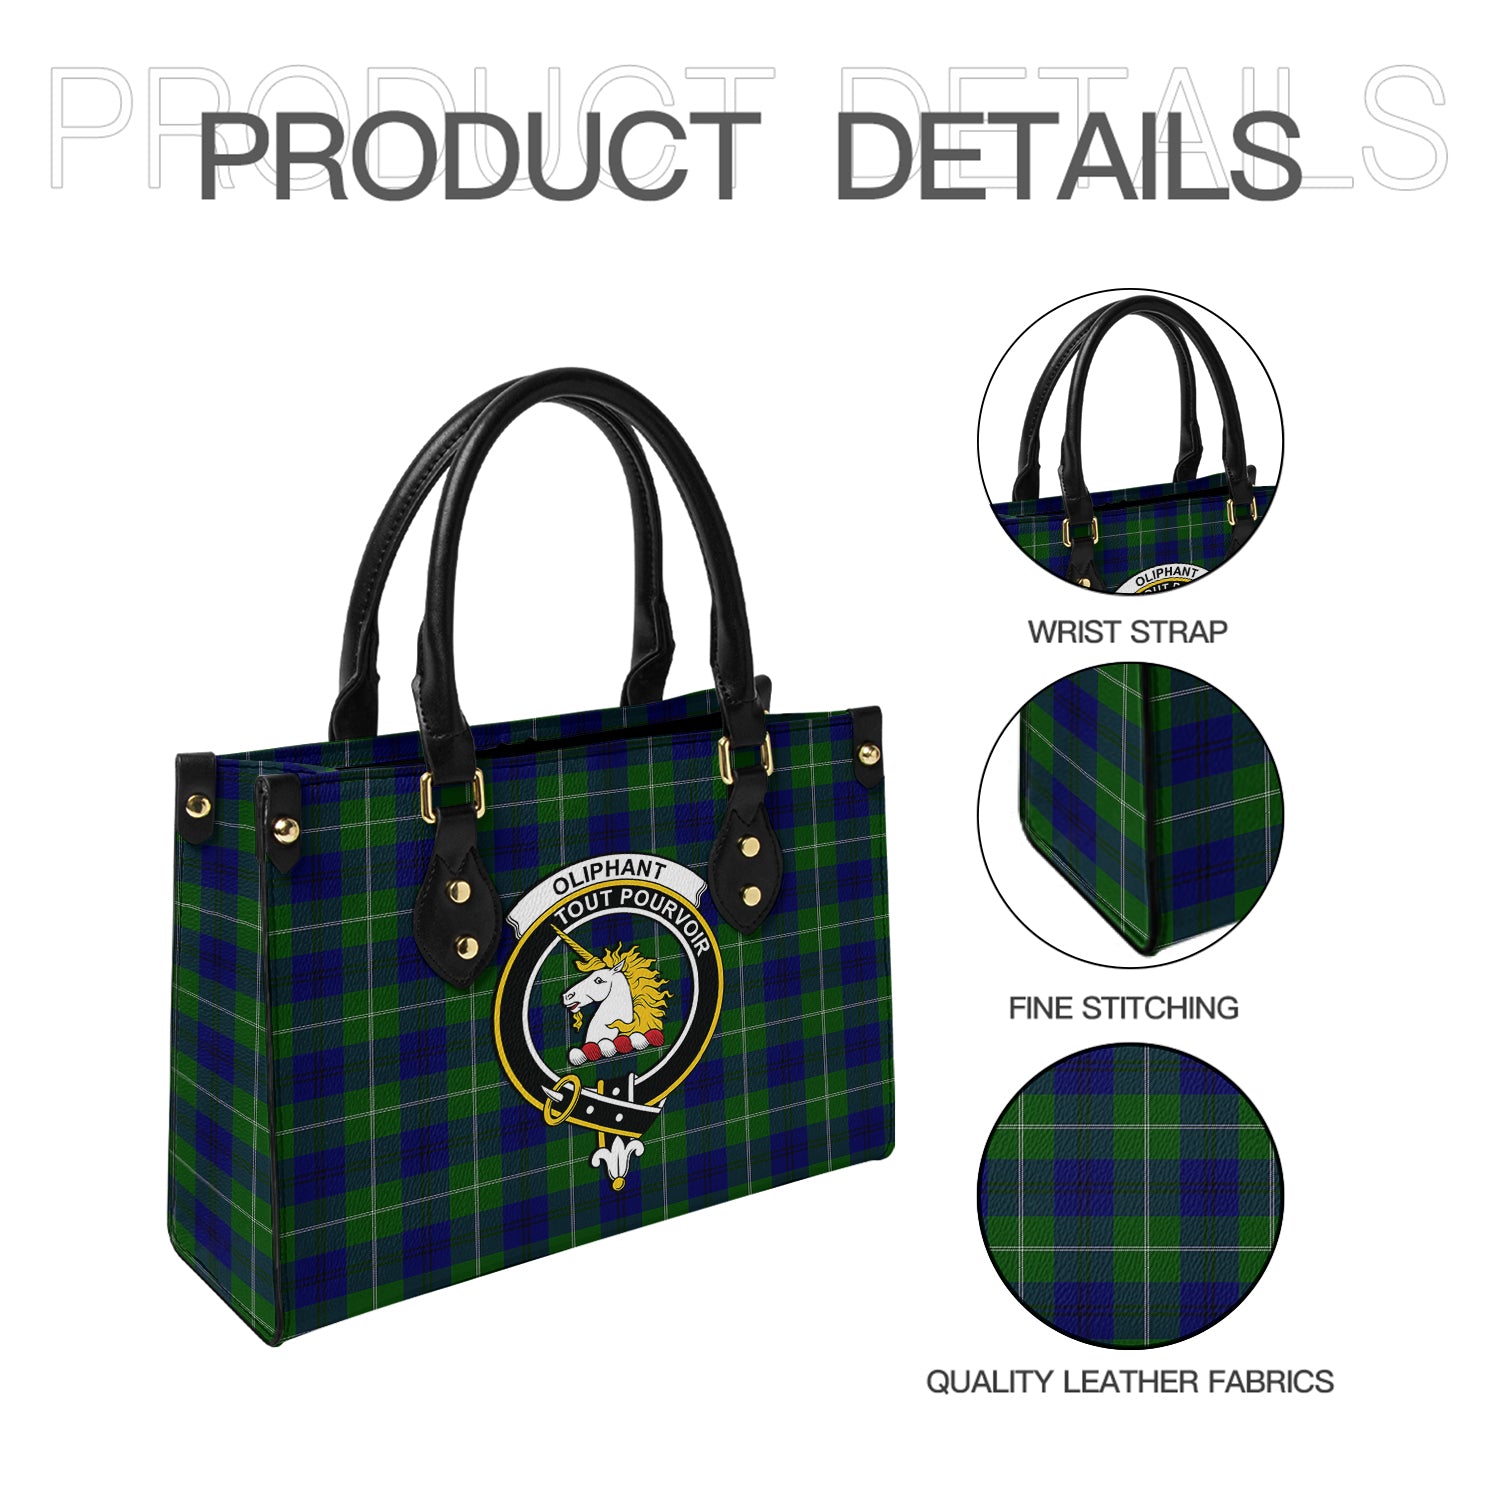 oliphant-modern-tartan-leather-bag-with-family-crest